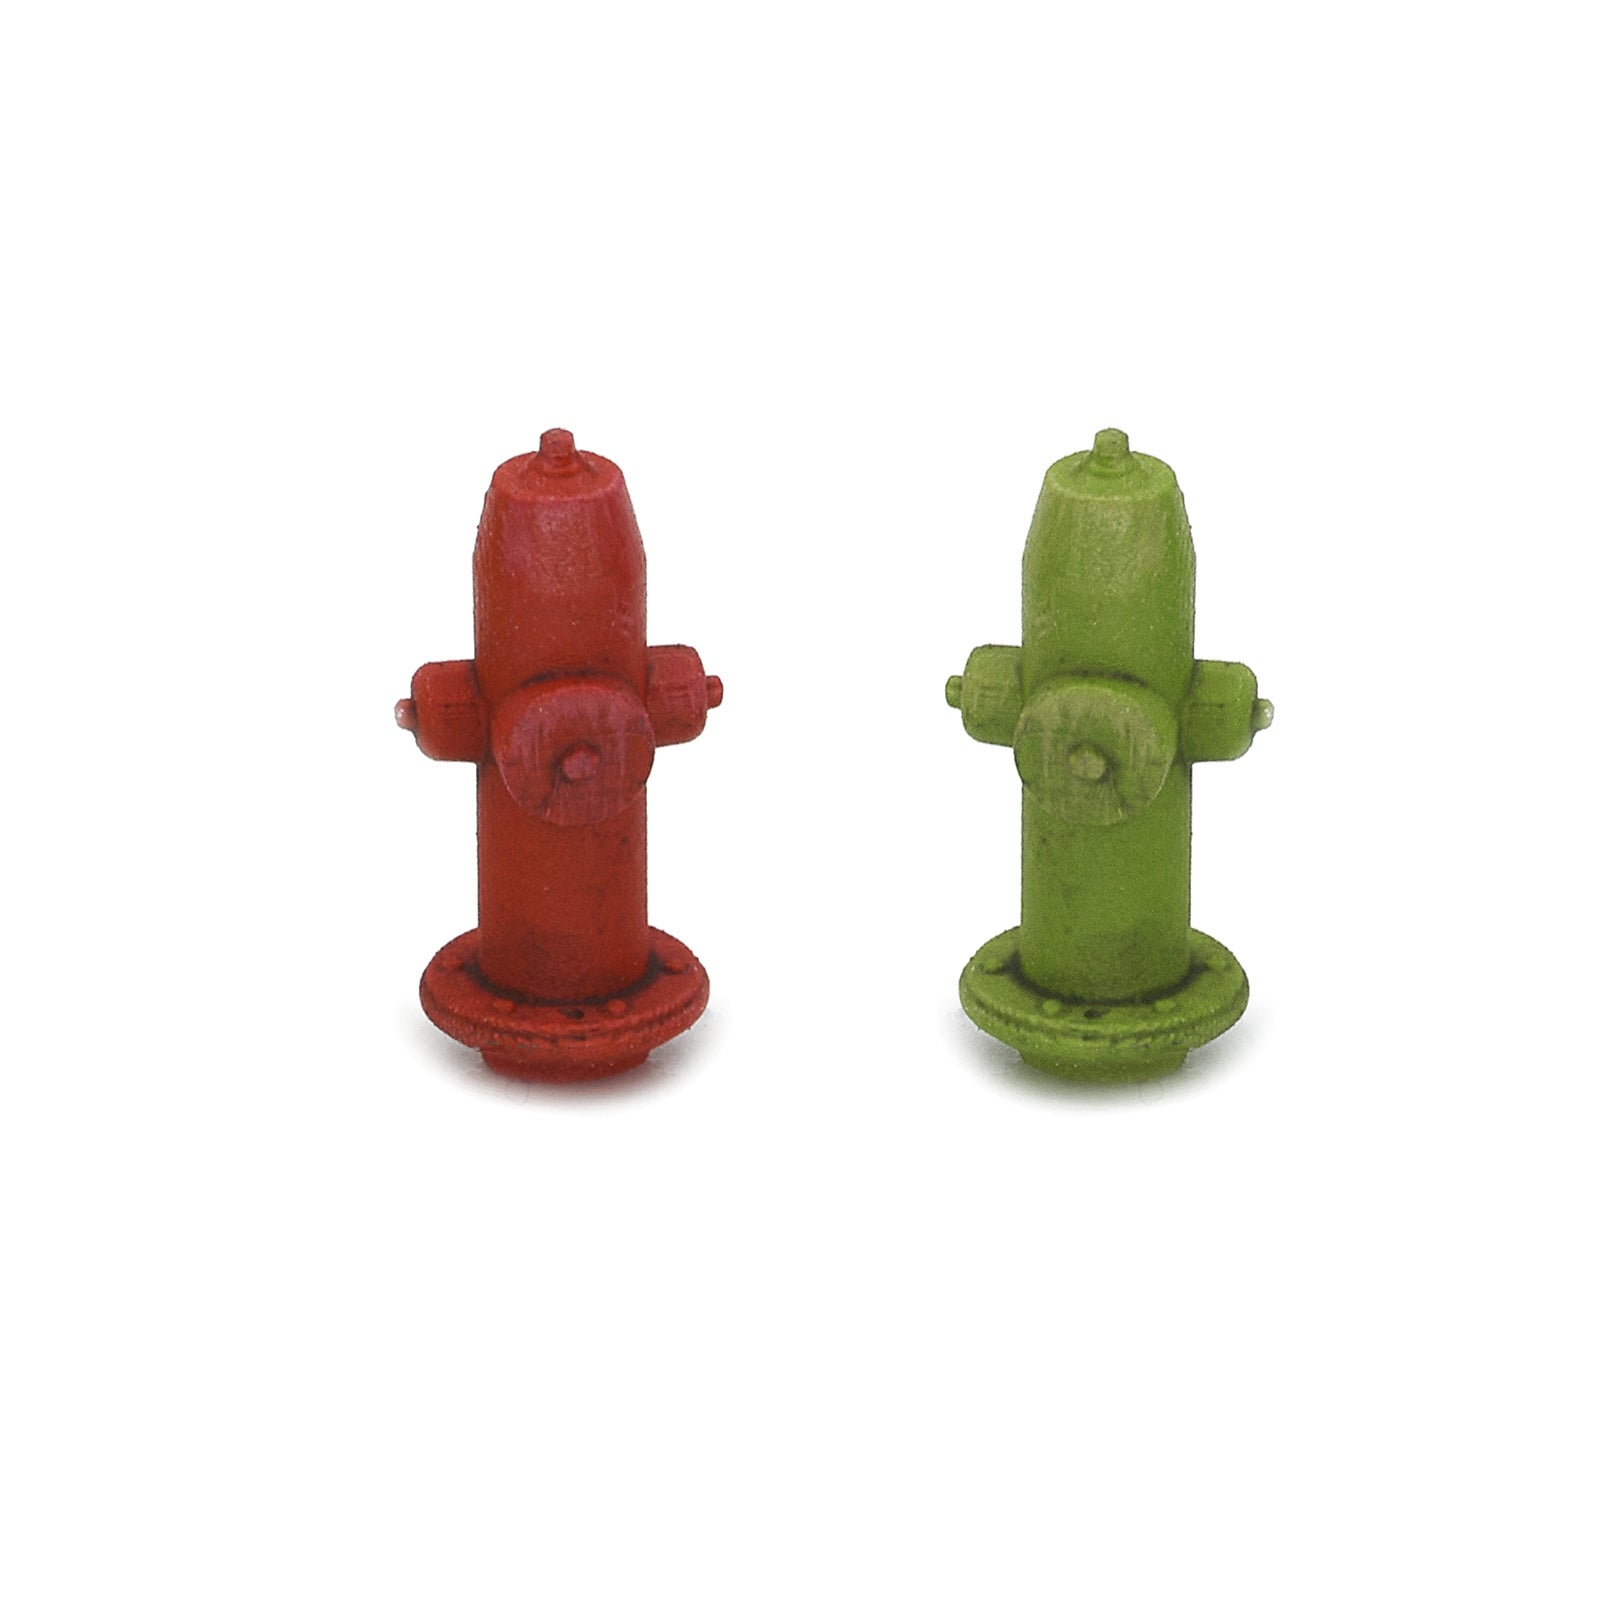 Modern Fire Hydrant, HO Scale, by Scientific, Pack of 10